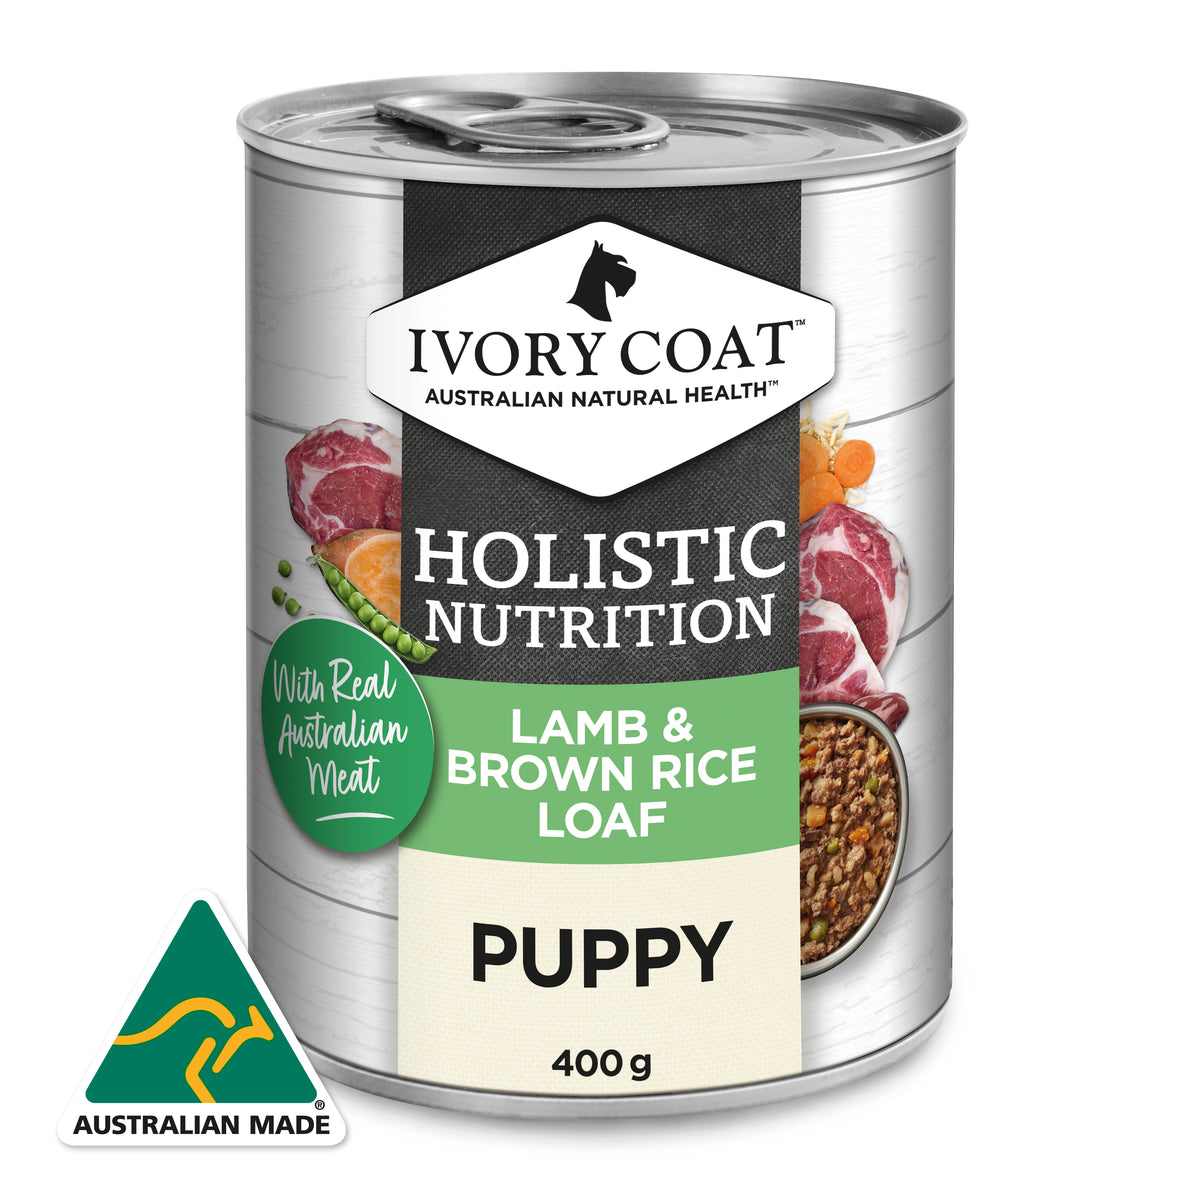 Holistic Nutrition Puppy Wet Dog Food Lamb & Brown Rice Loaf 400g